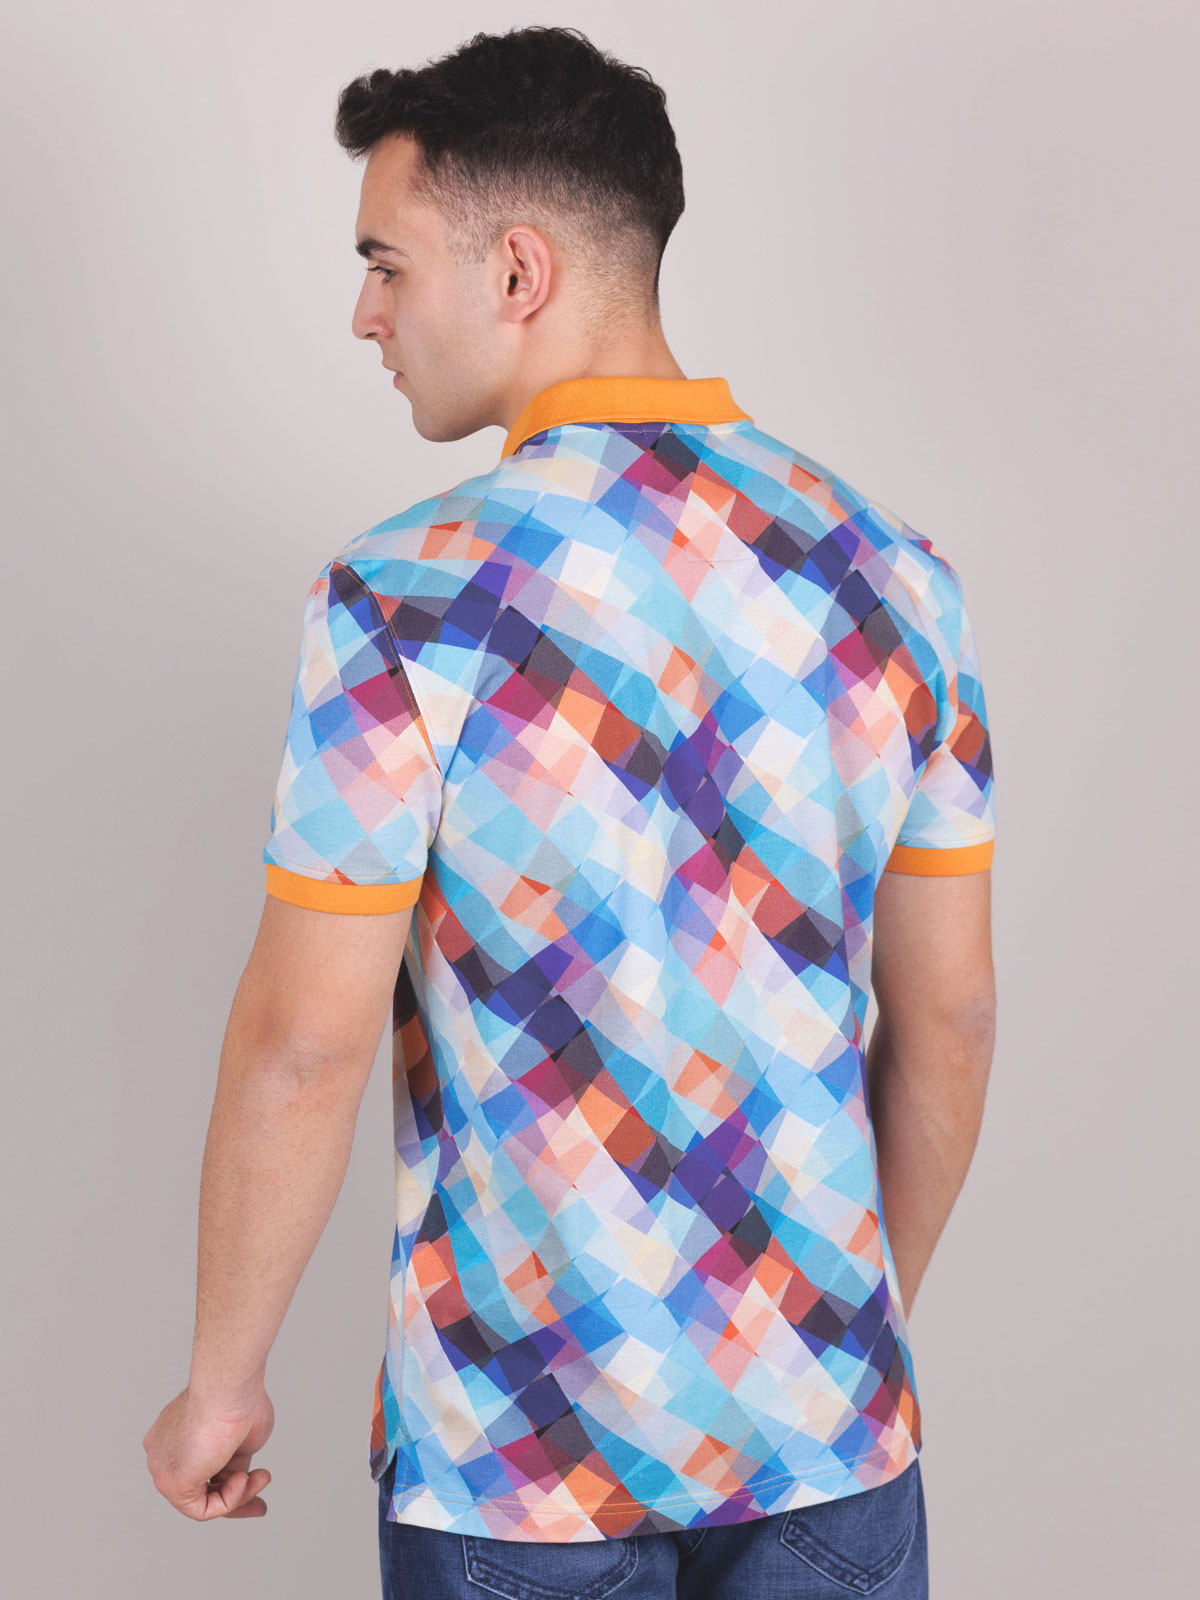 Tshirt with multicolored squares - 93428 € 40.49 img2